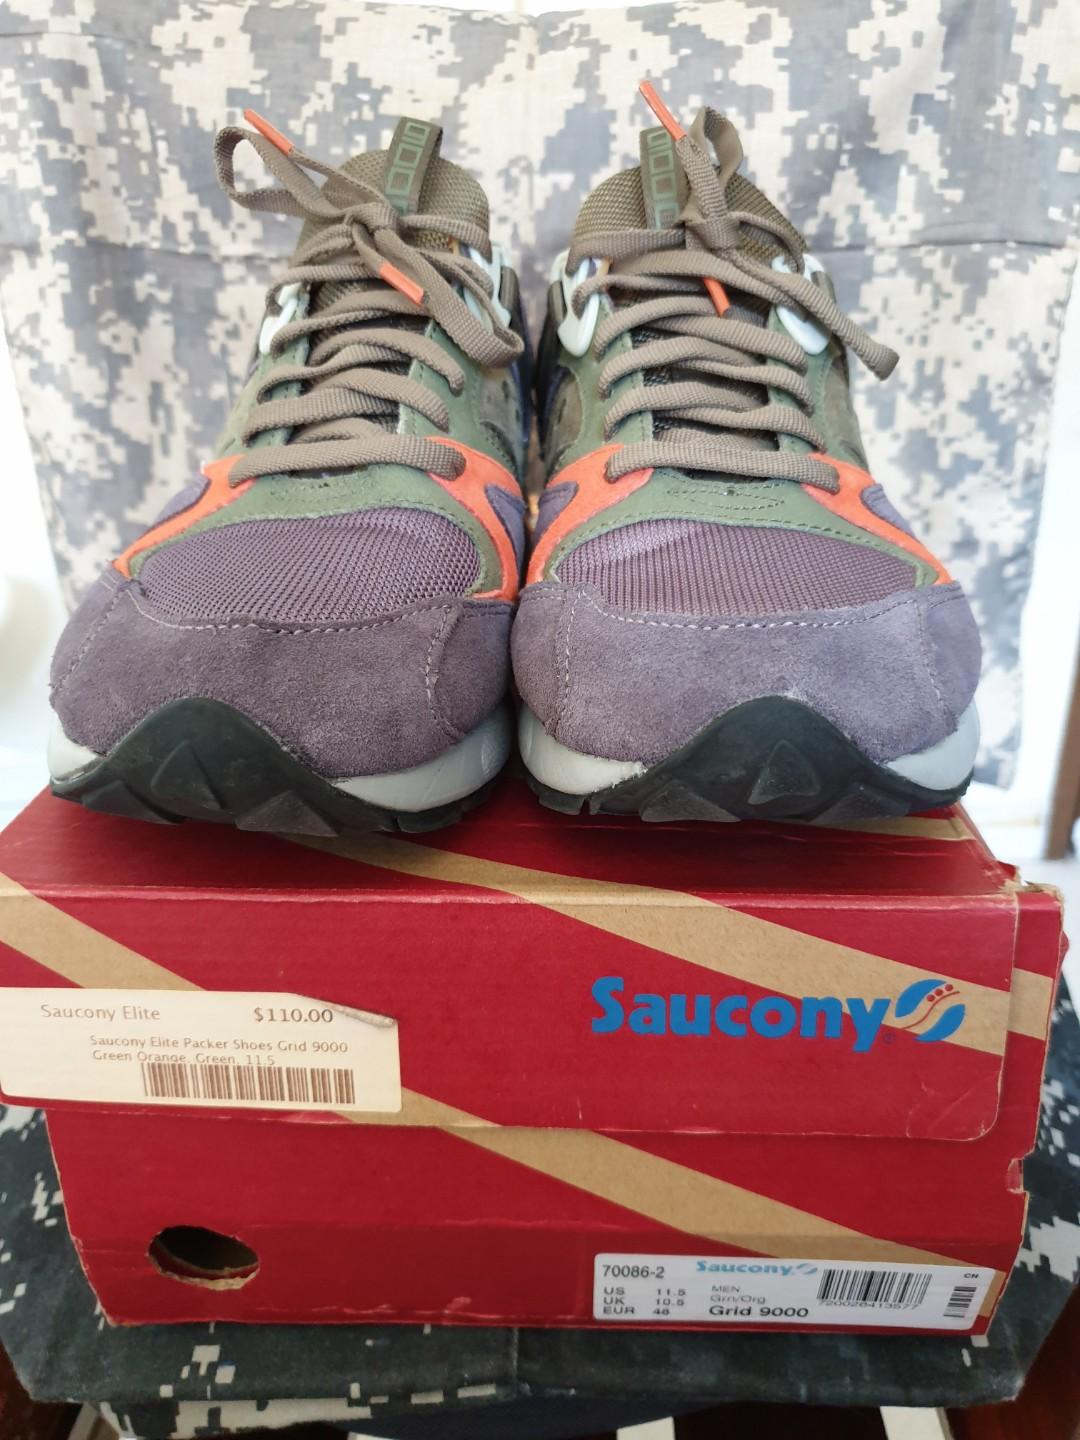 saucony grid 9000 packer for sale